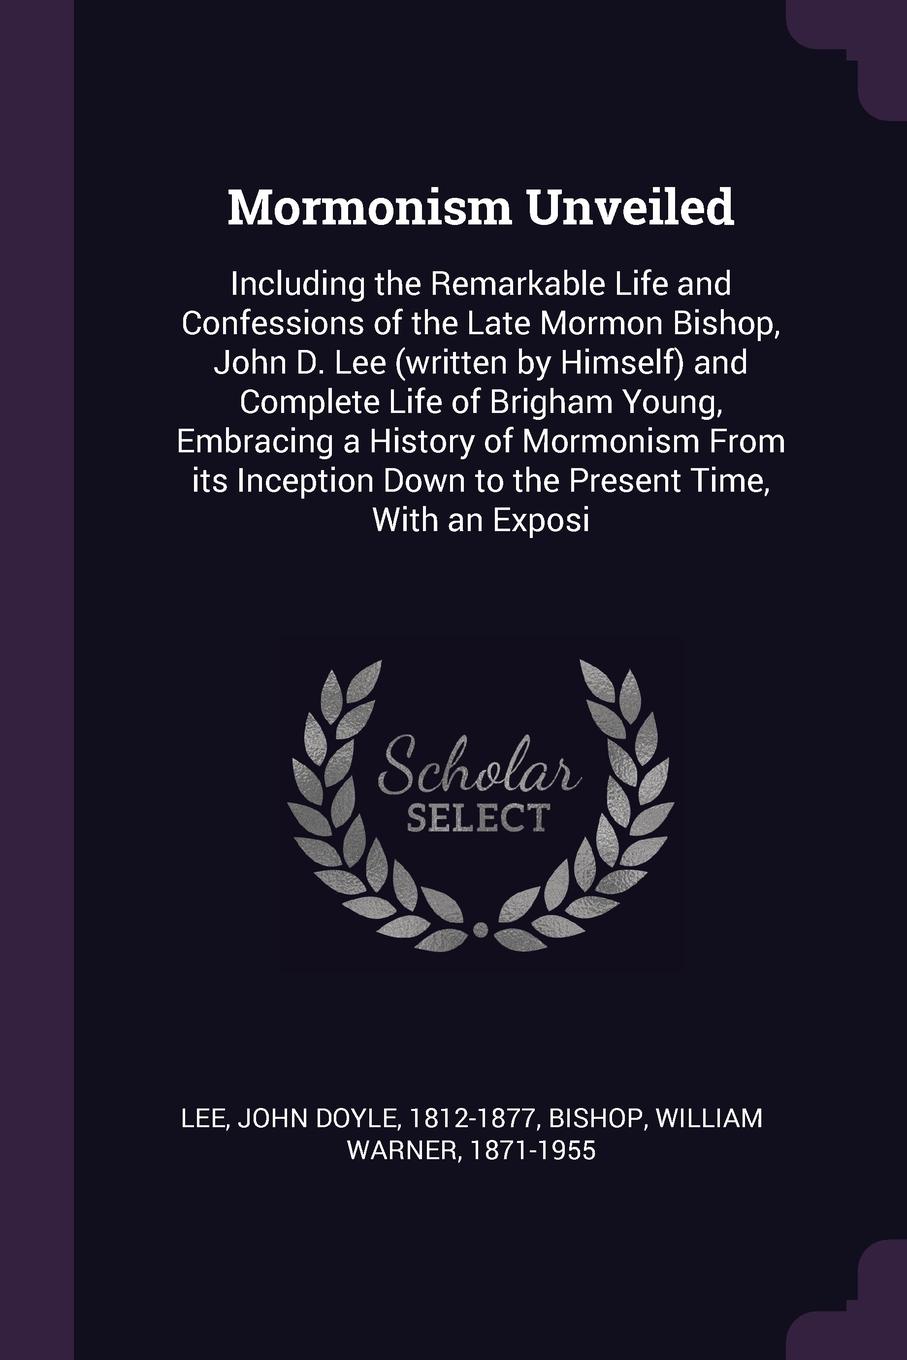 Mormonism Unveiled. Including the Remarkable Life and Confessions of the Late Mormon Bishop, John D. Lee (written by Himself) and Complete Life of Brigham Young, Embracing a History of Mormonism From its Inception Down to the Present Time, With an...